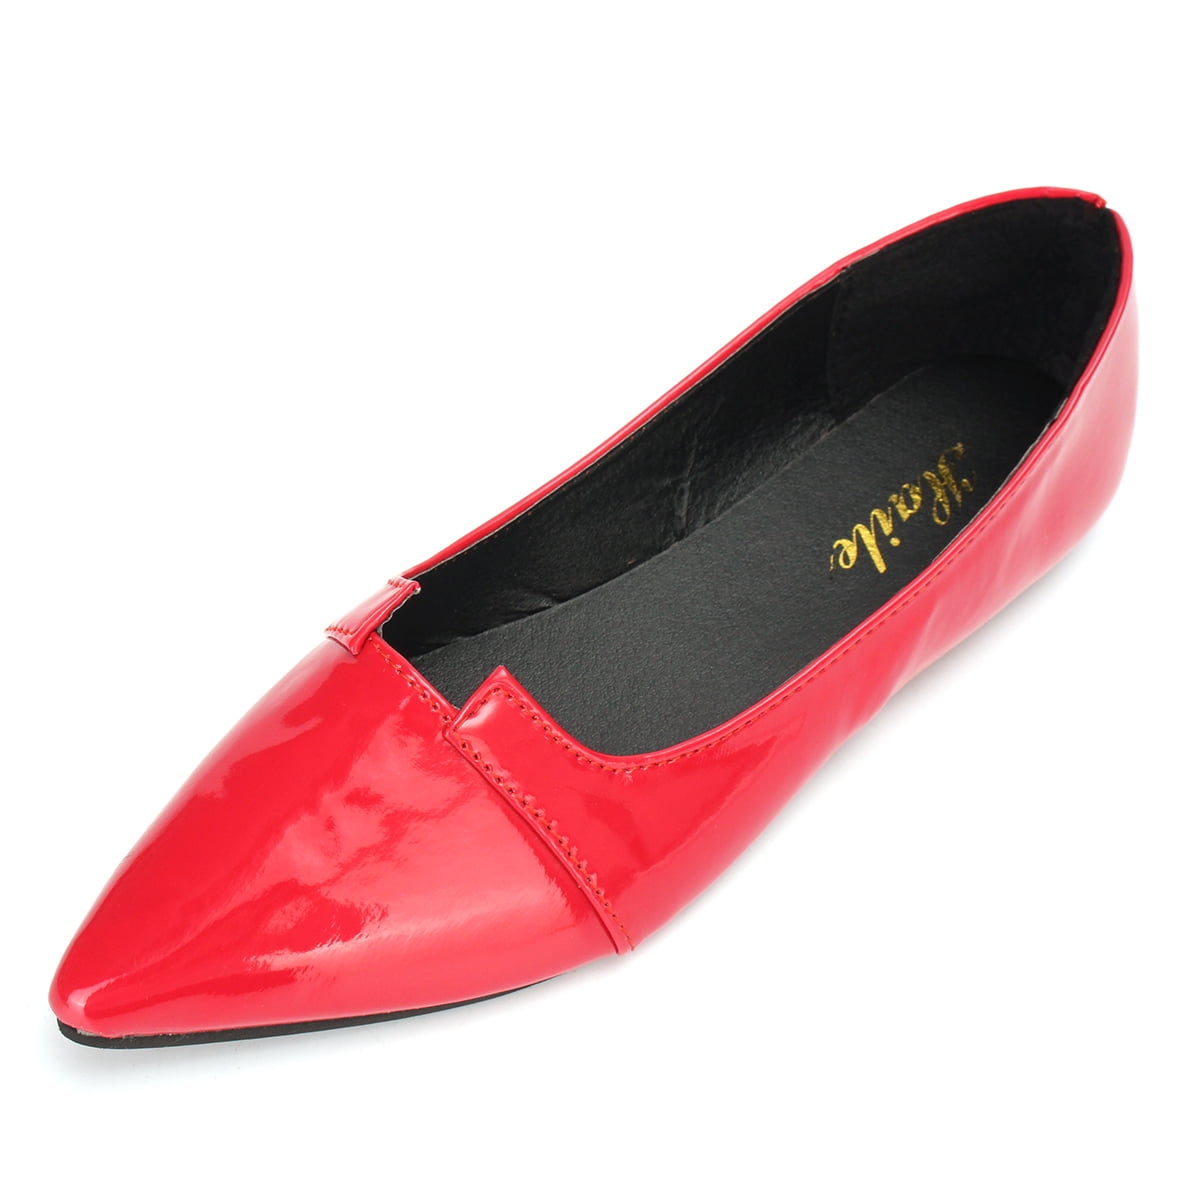 New Womens Lady Flats Shoes Slip On Patent Leather Pointy Toe Work Casual Shoes